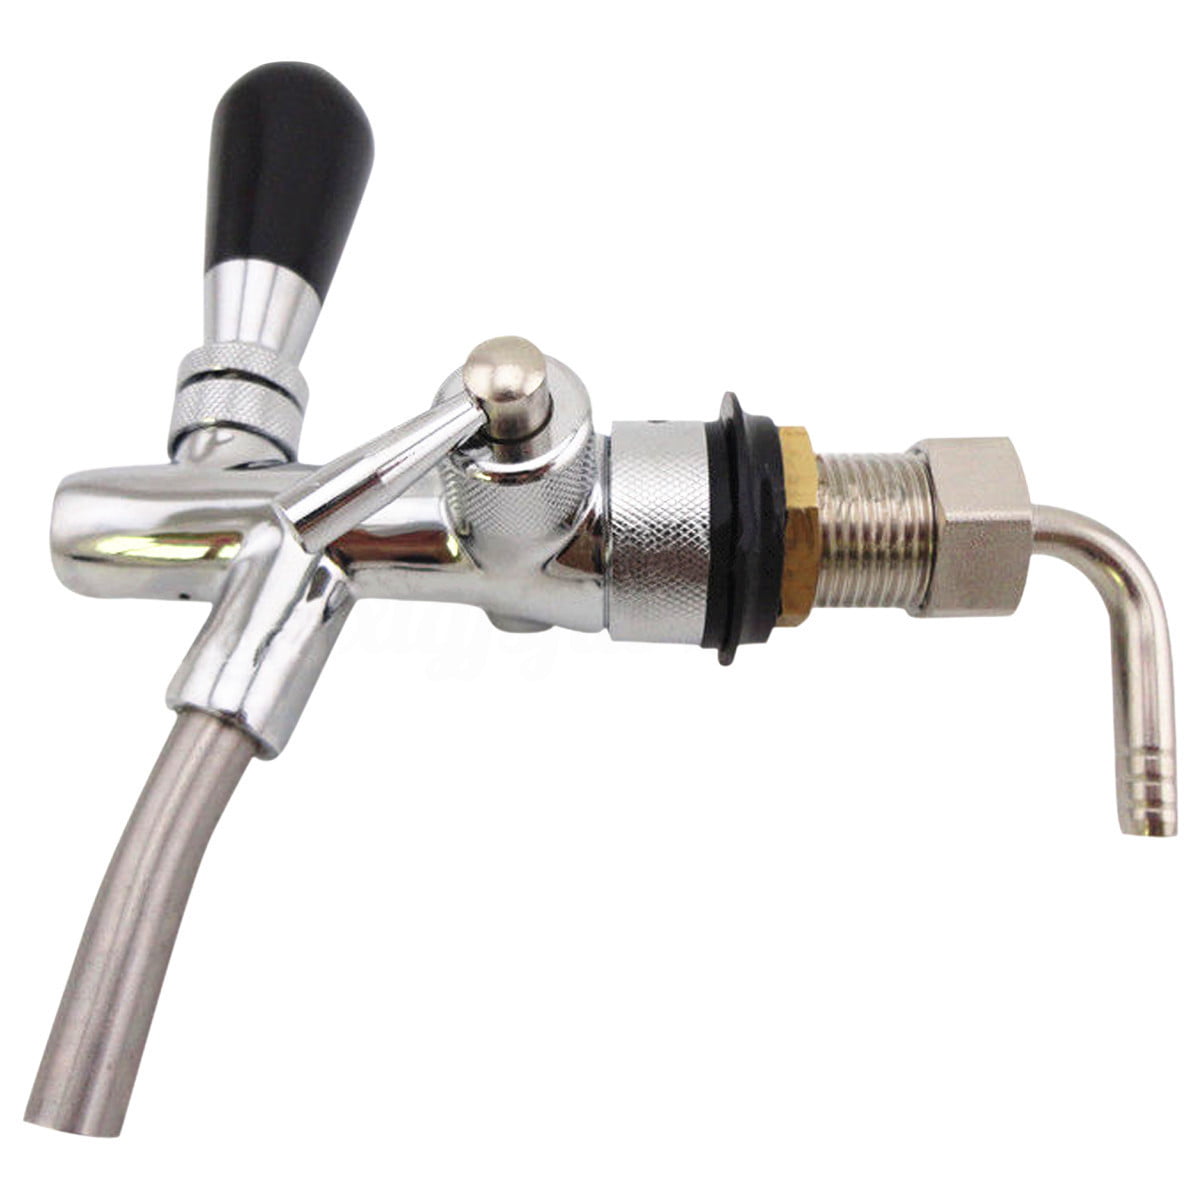 Brand New Adjustable Beer Draft Tap Faucet With Flow Control Home Brew 